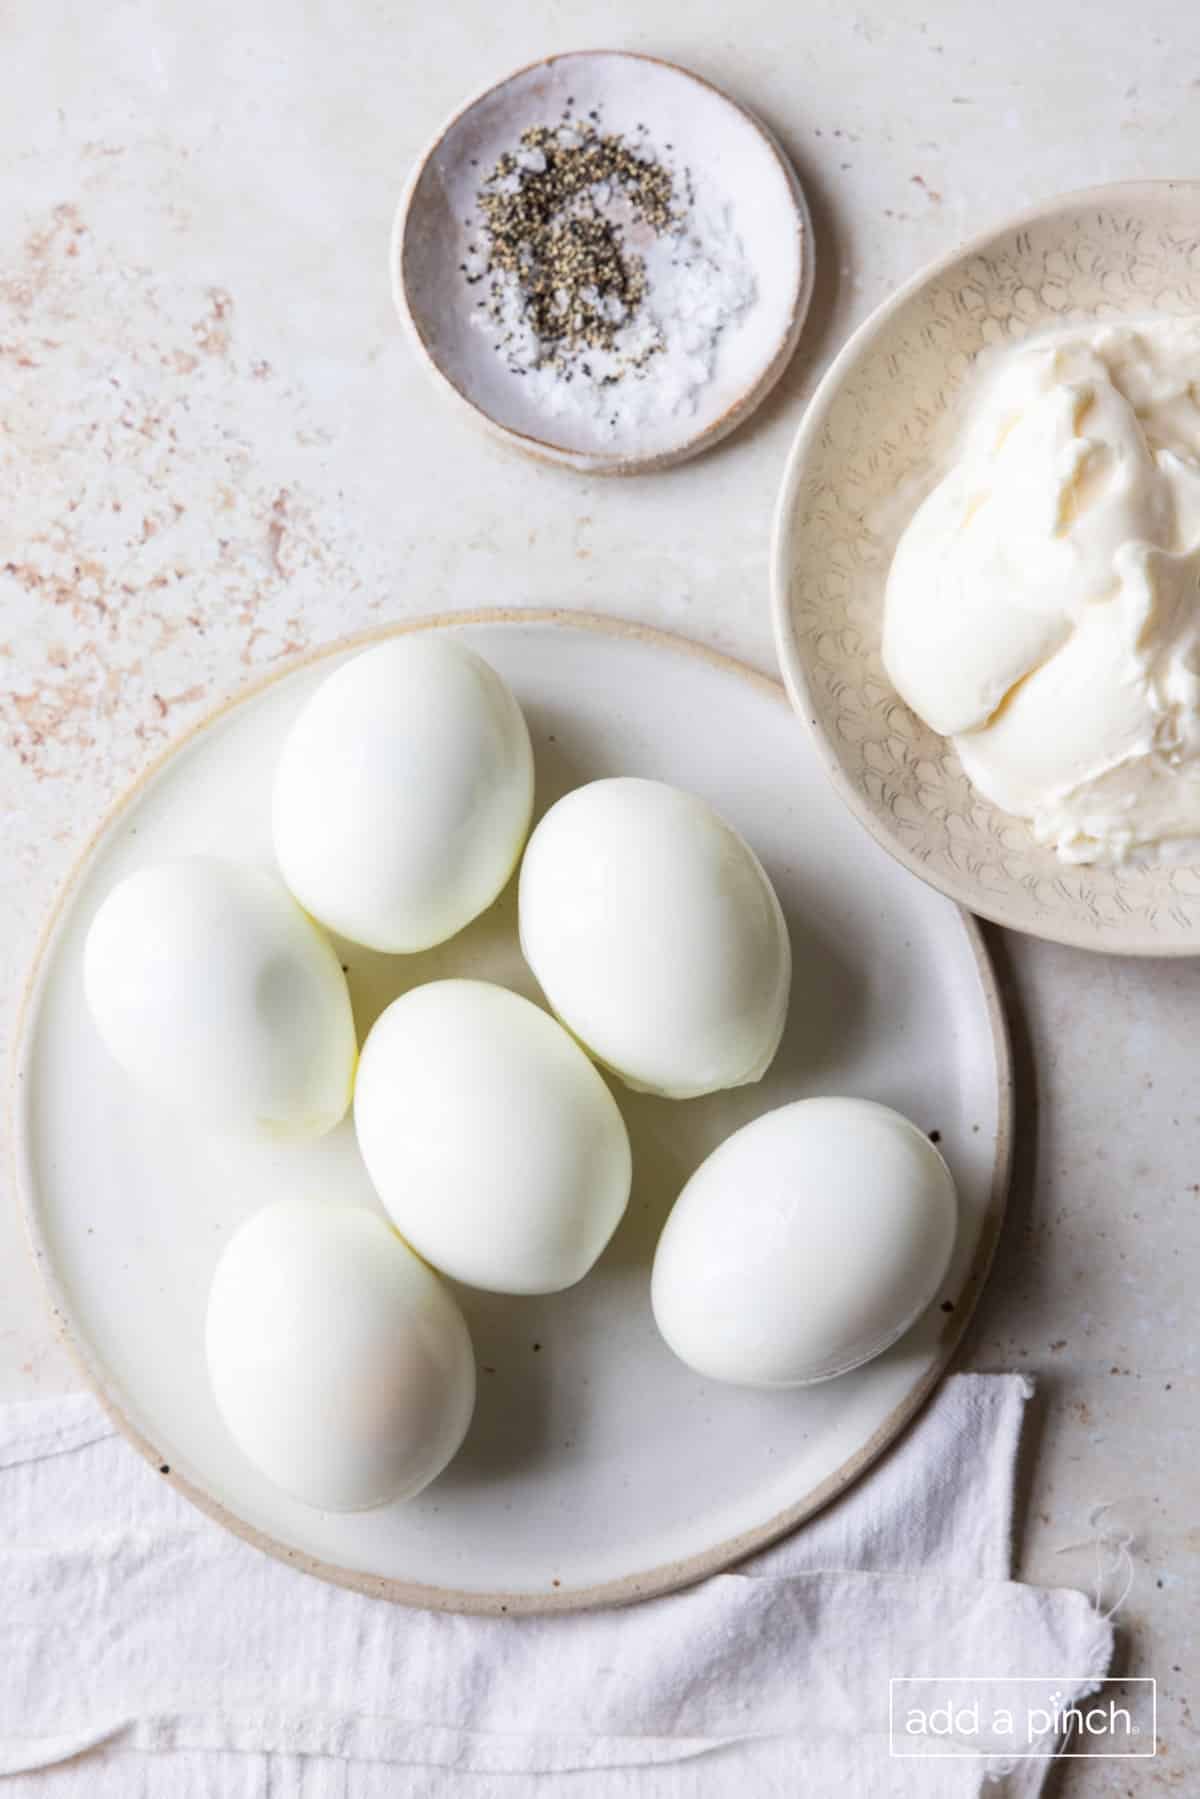 Ingredients used to make classic egg salad.